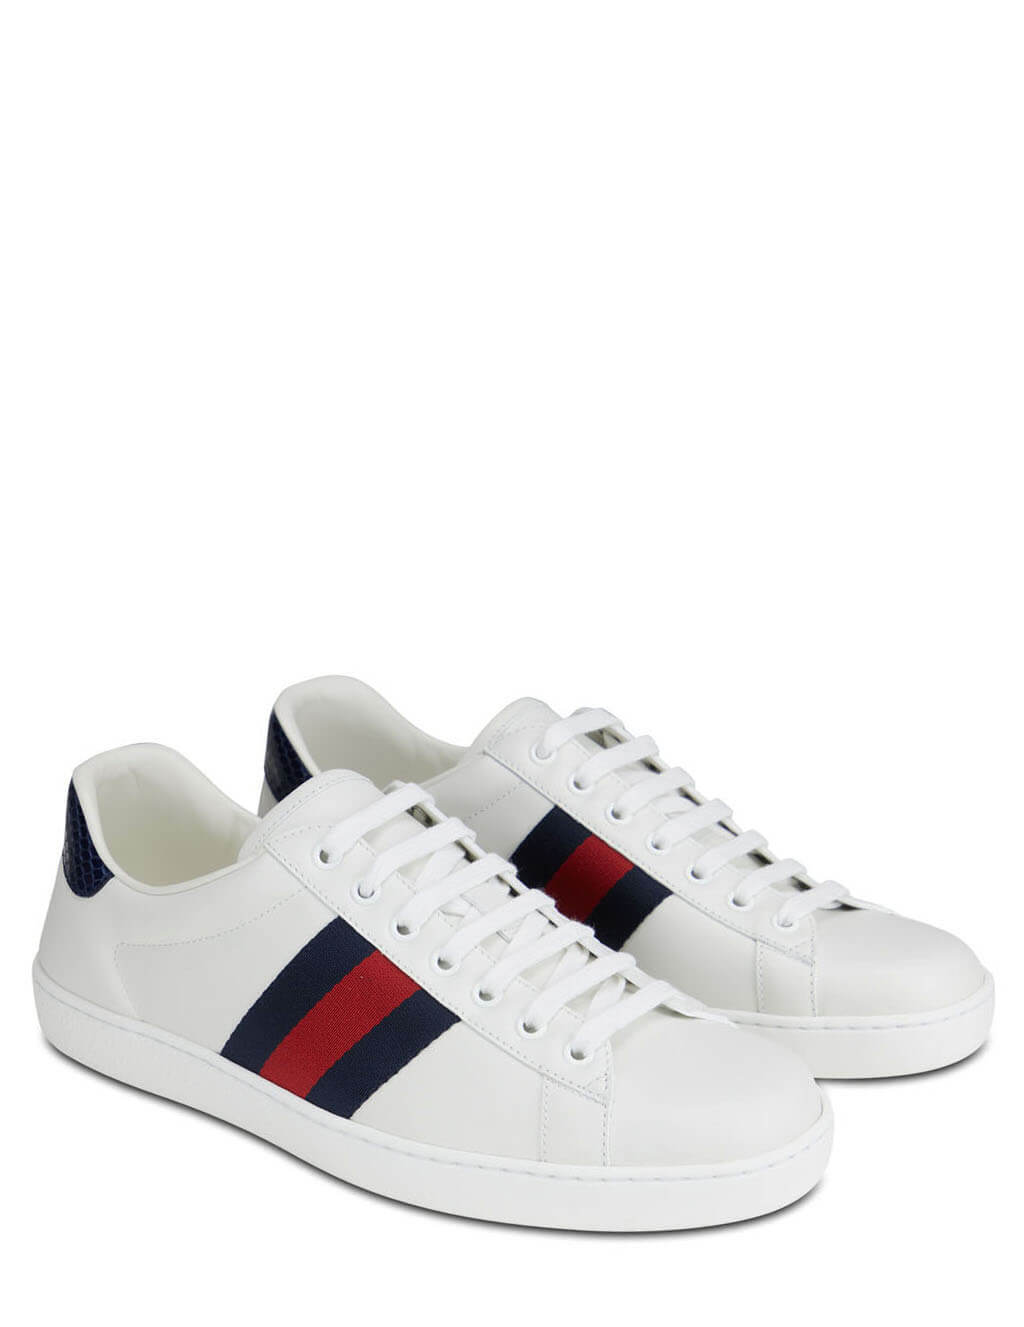 red and blue gucci sneakers